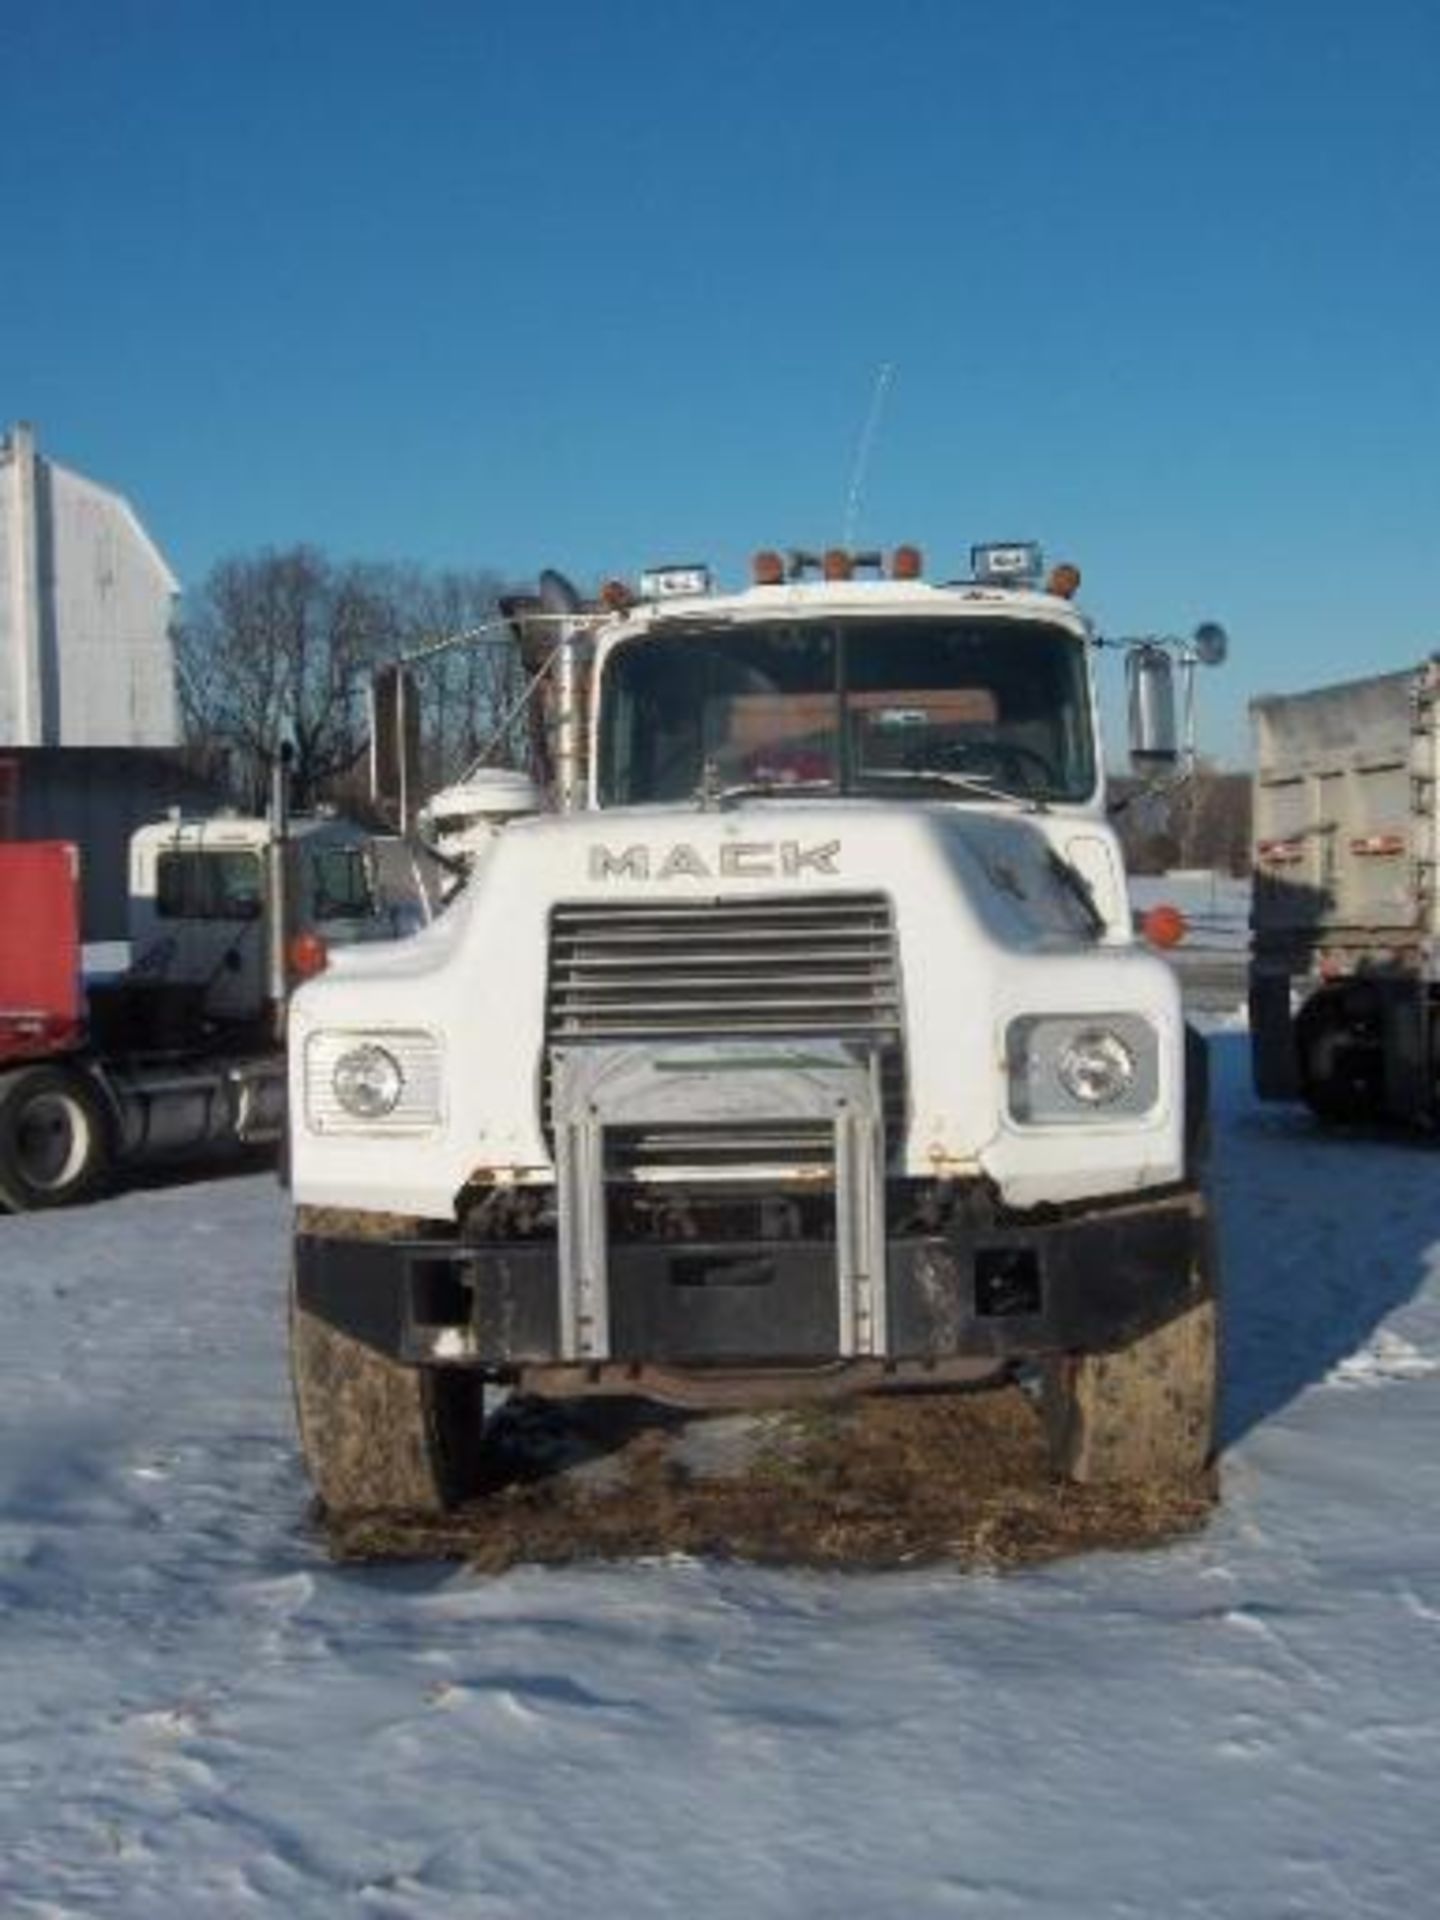 Mack DM 965 1989 model 300 with recent ($12,000+) engine overhaul and Lo hole trans, and # 5570 Myer - Image 7 of 14